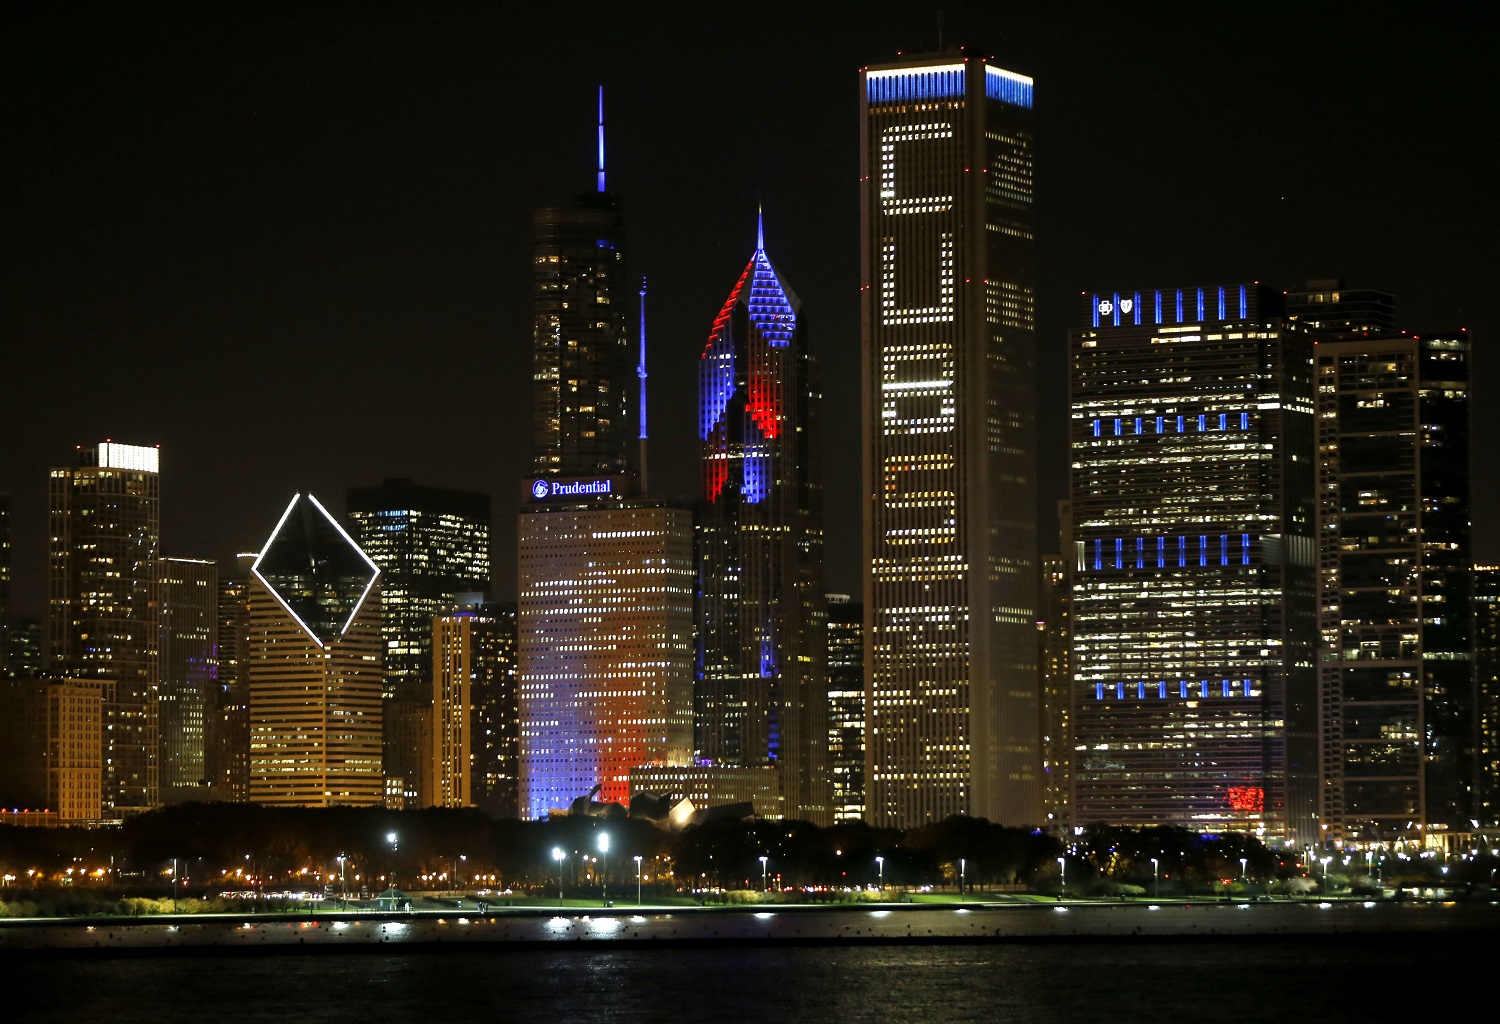 The Chicago skyline is lit with supportive window messages for Chicago Cubs fans after an earlier rally in Grant Park honoring the World Series baseball champions, Friday, Nov. 4, 2016. (AP Photo/Charles Rex Arbogast)